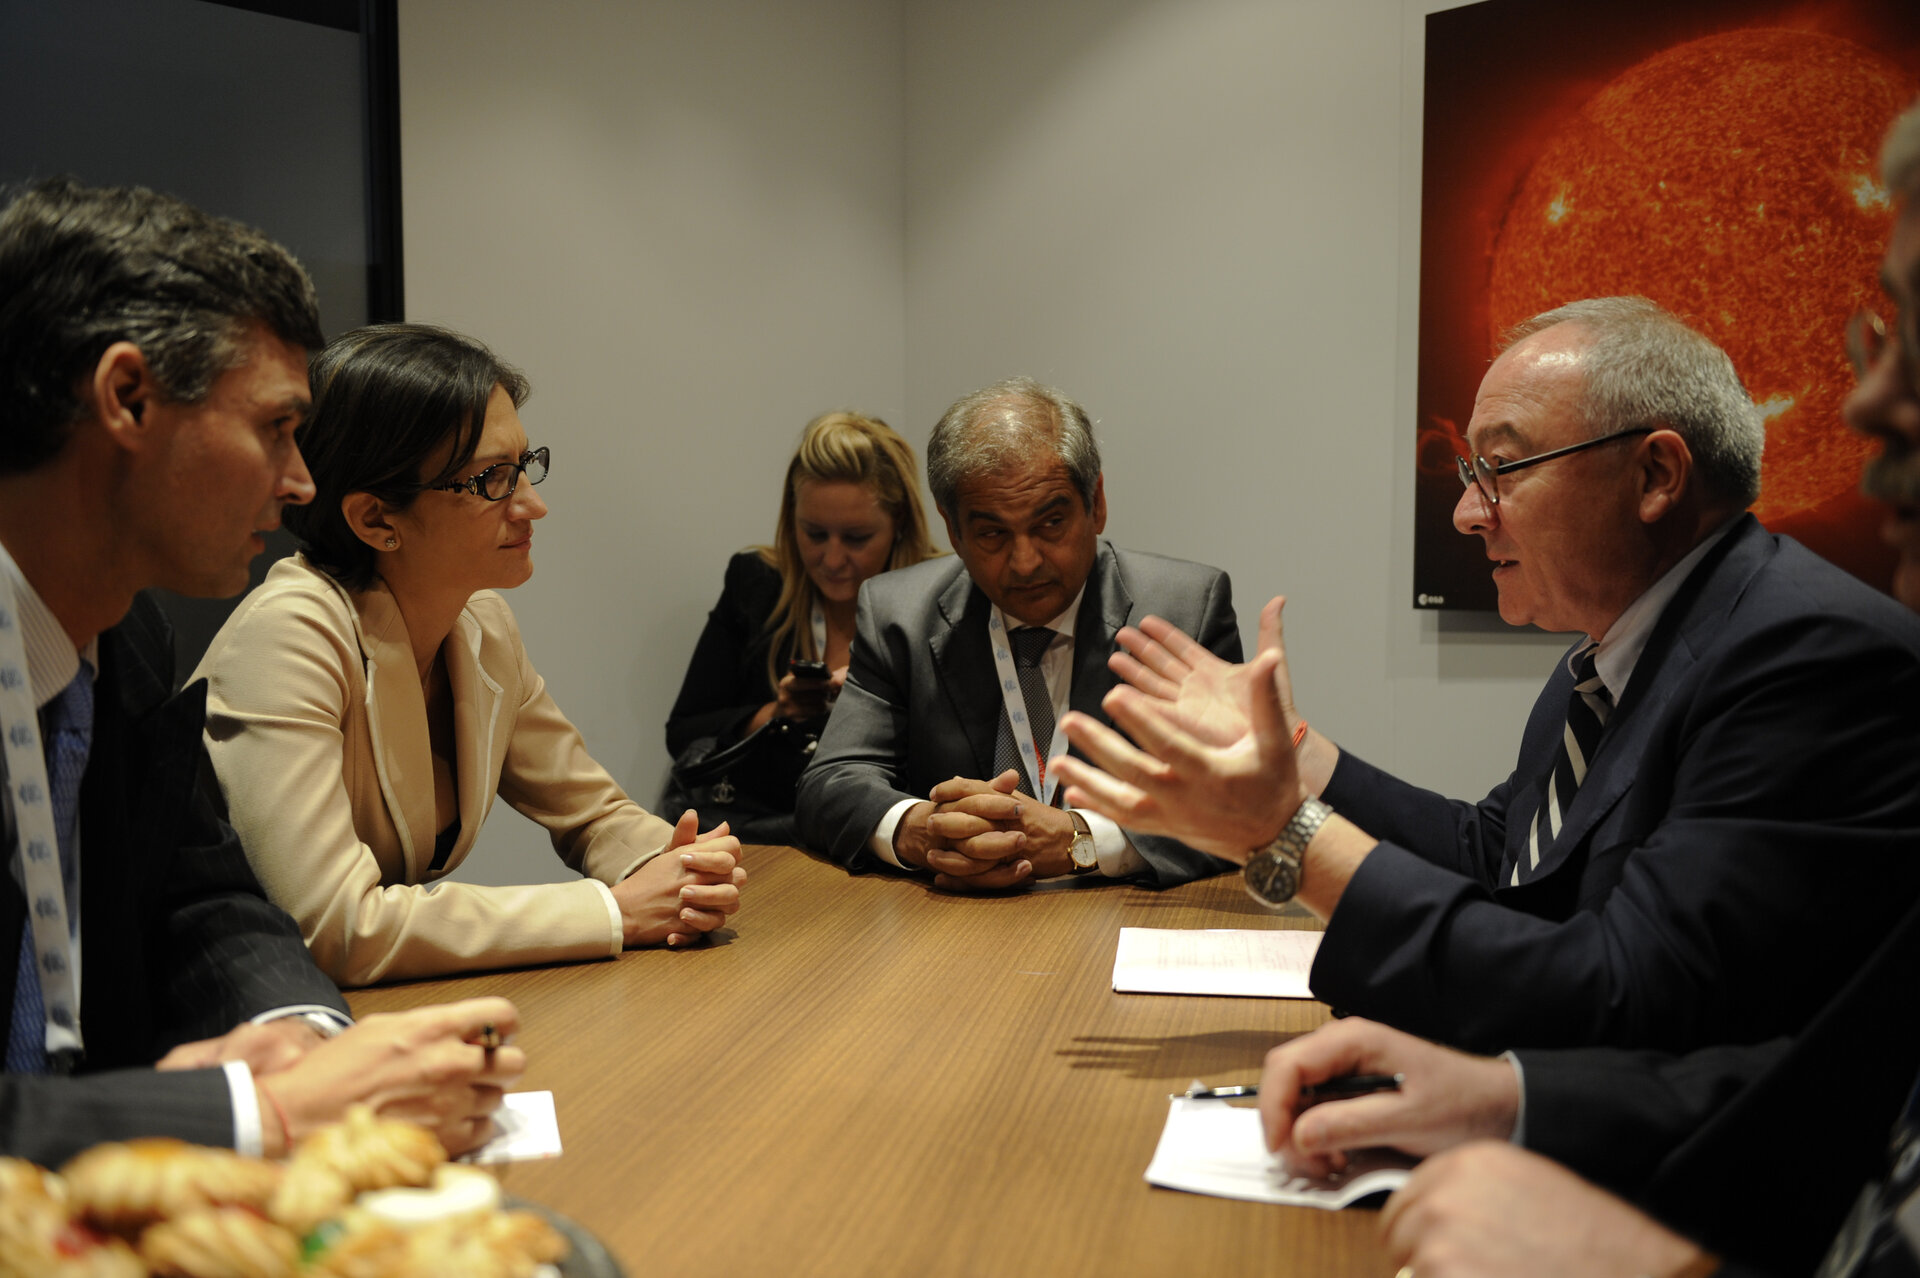 Meeting between the Italian Minister for Education, Universities & Research and the European Space Agency